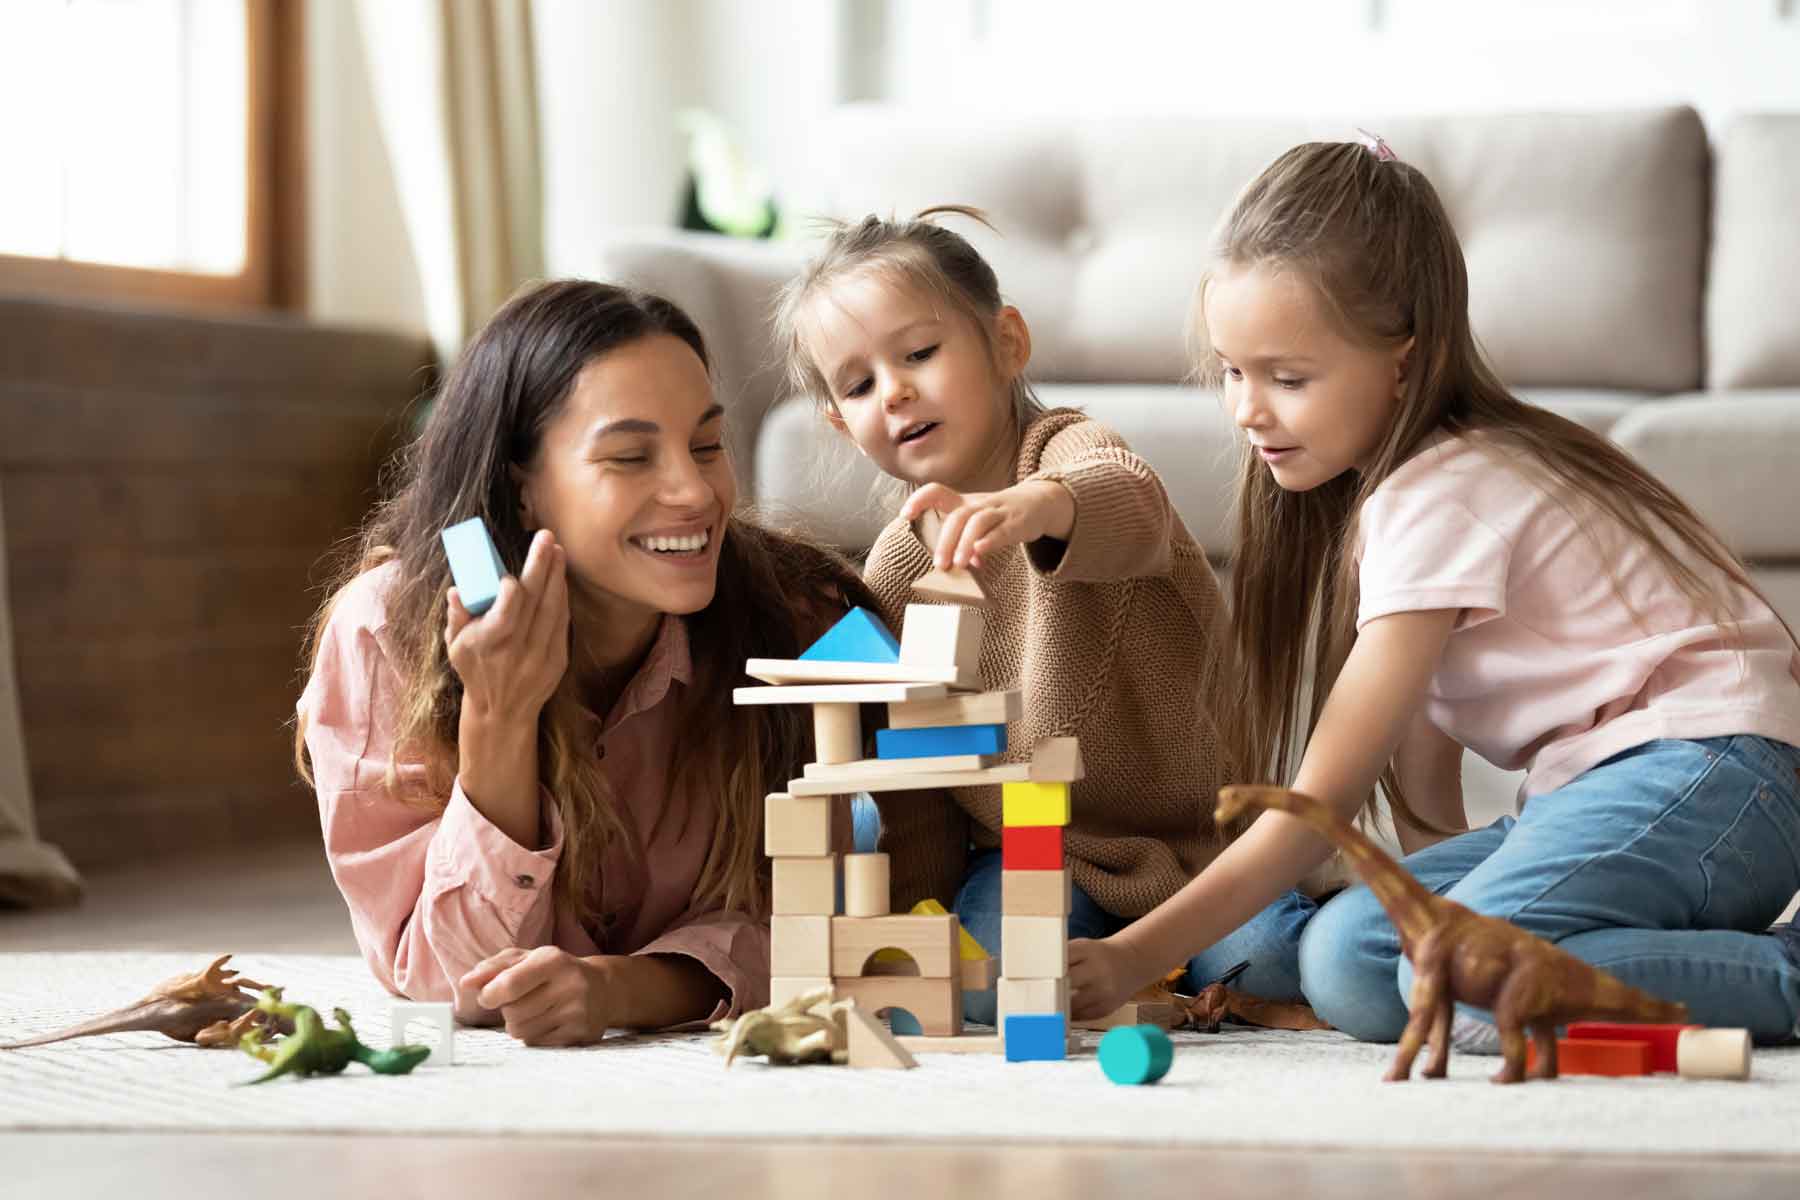 An au pair playing with two young children.